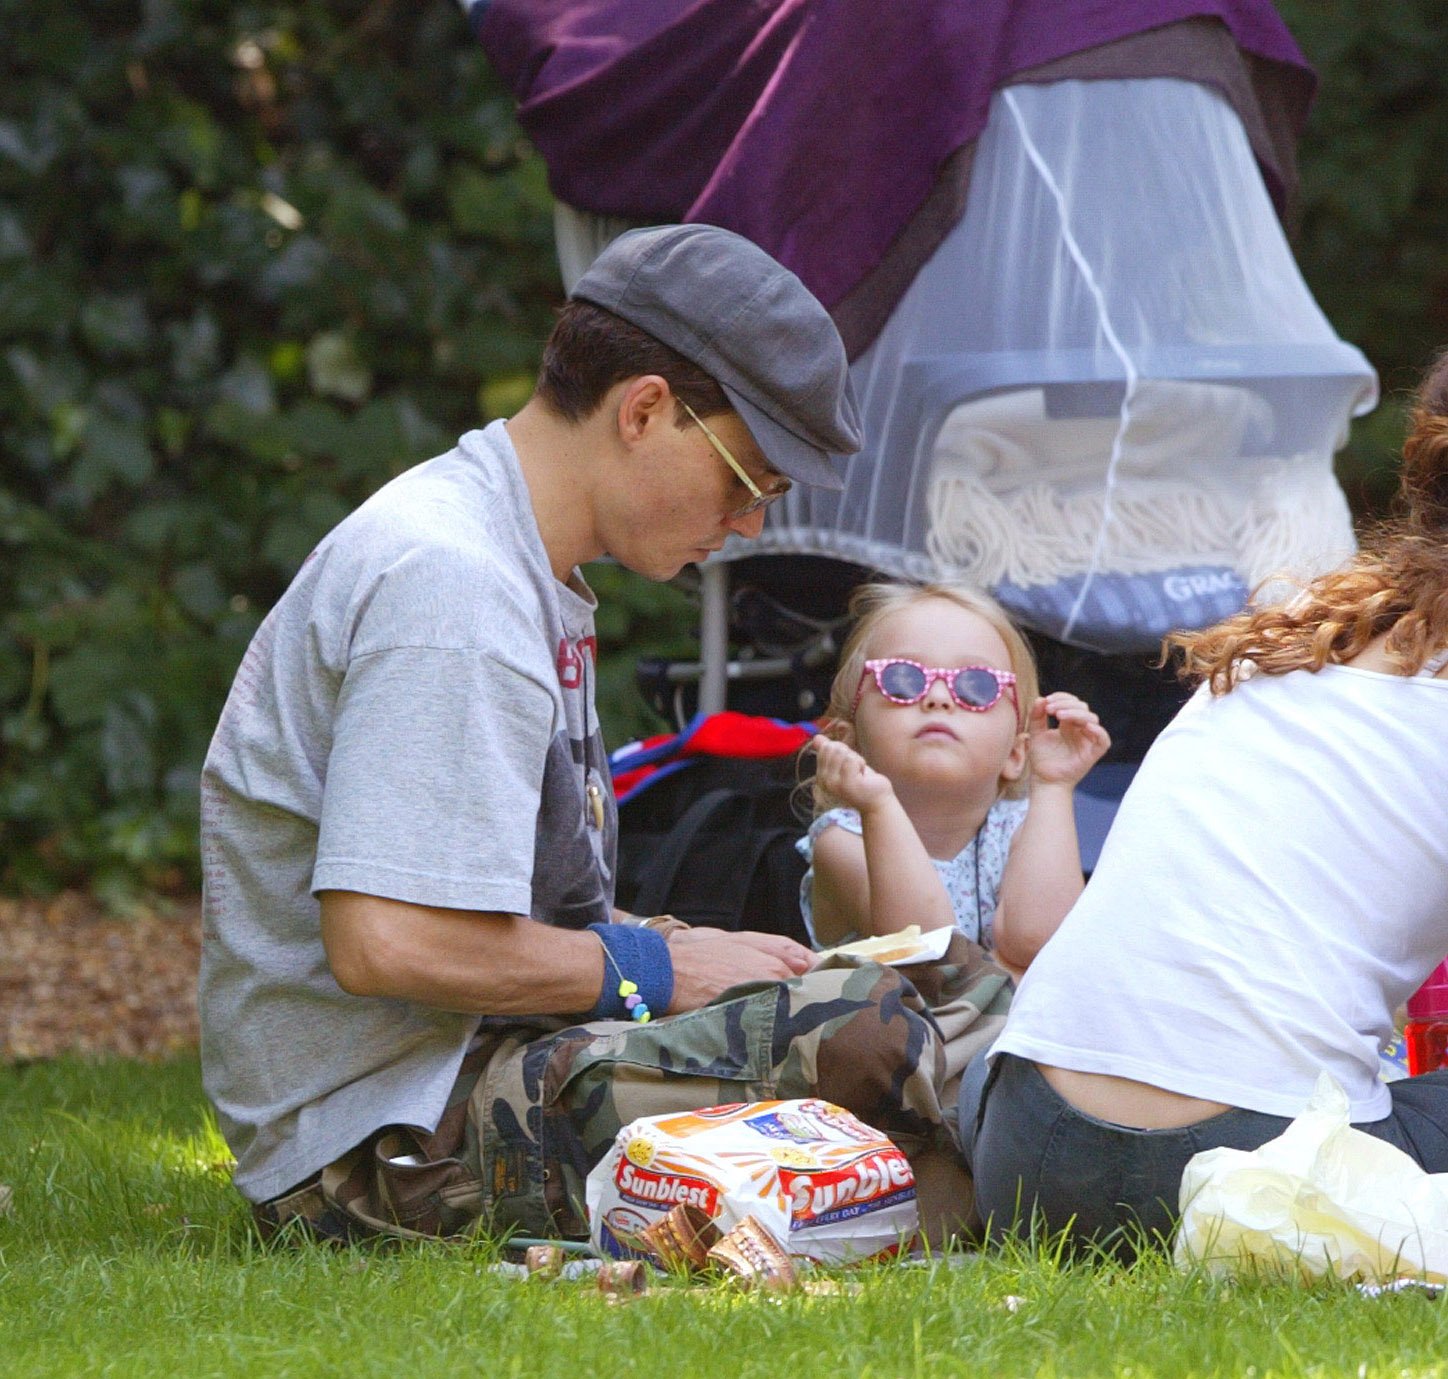 Johnny Depp pictured with his daughter ,Lily-Rose, on a picnic at a London Park. | Source: Getty Images